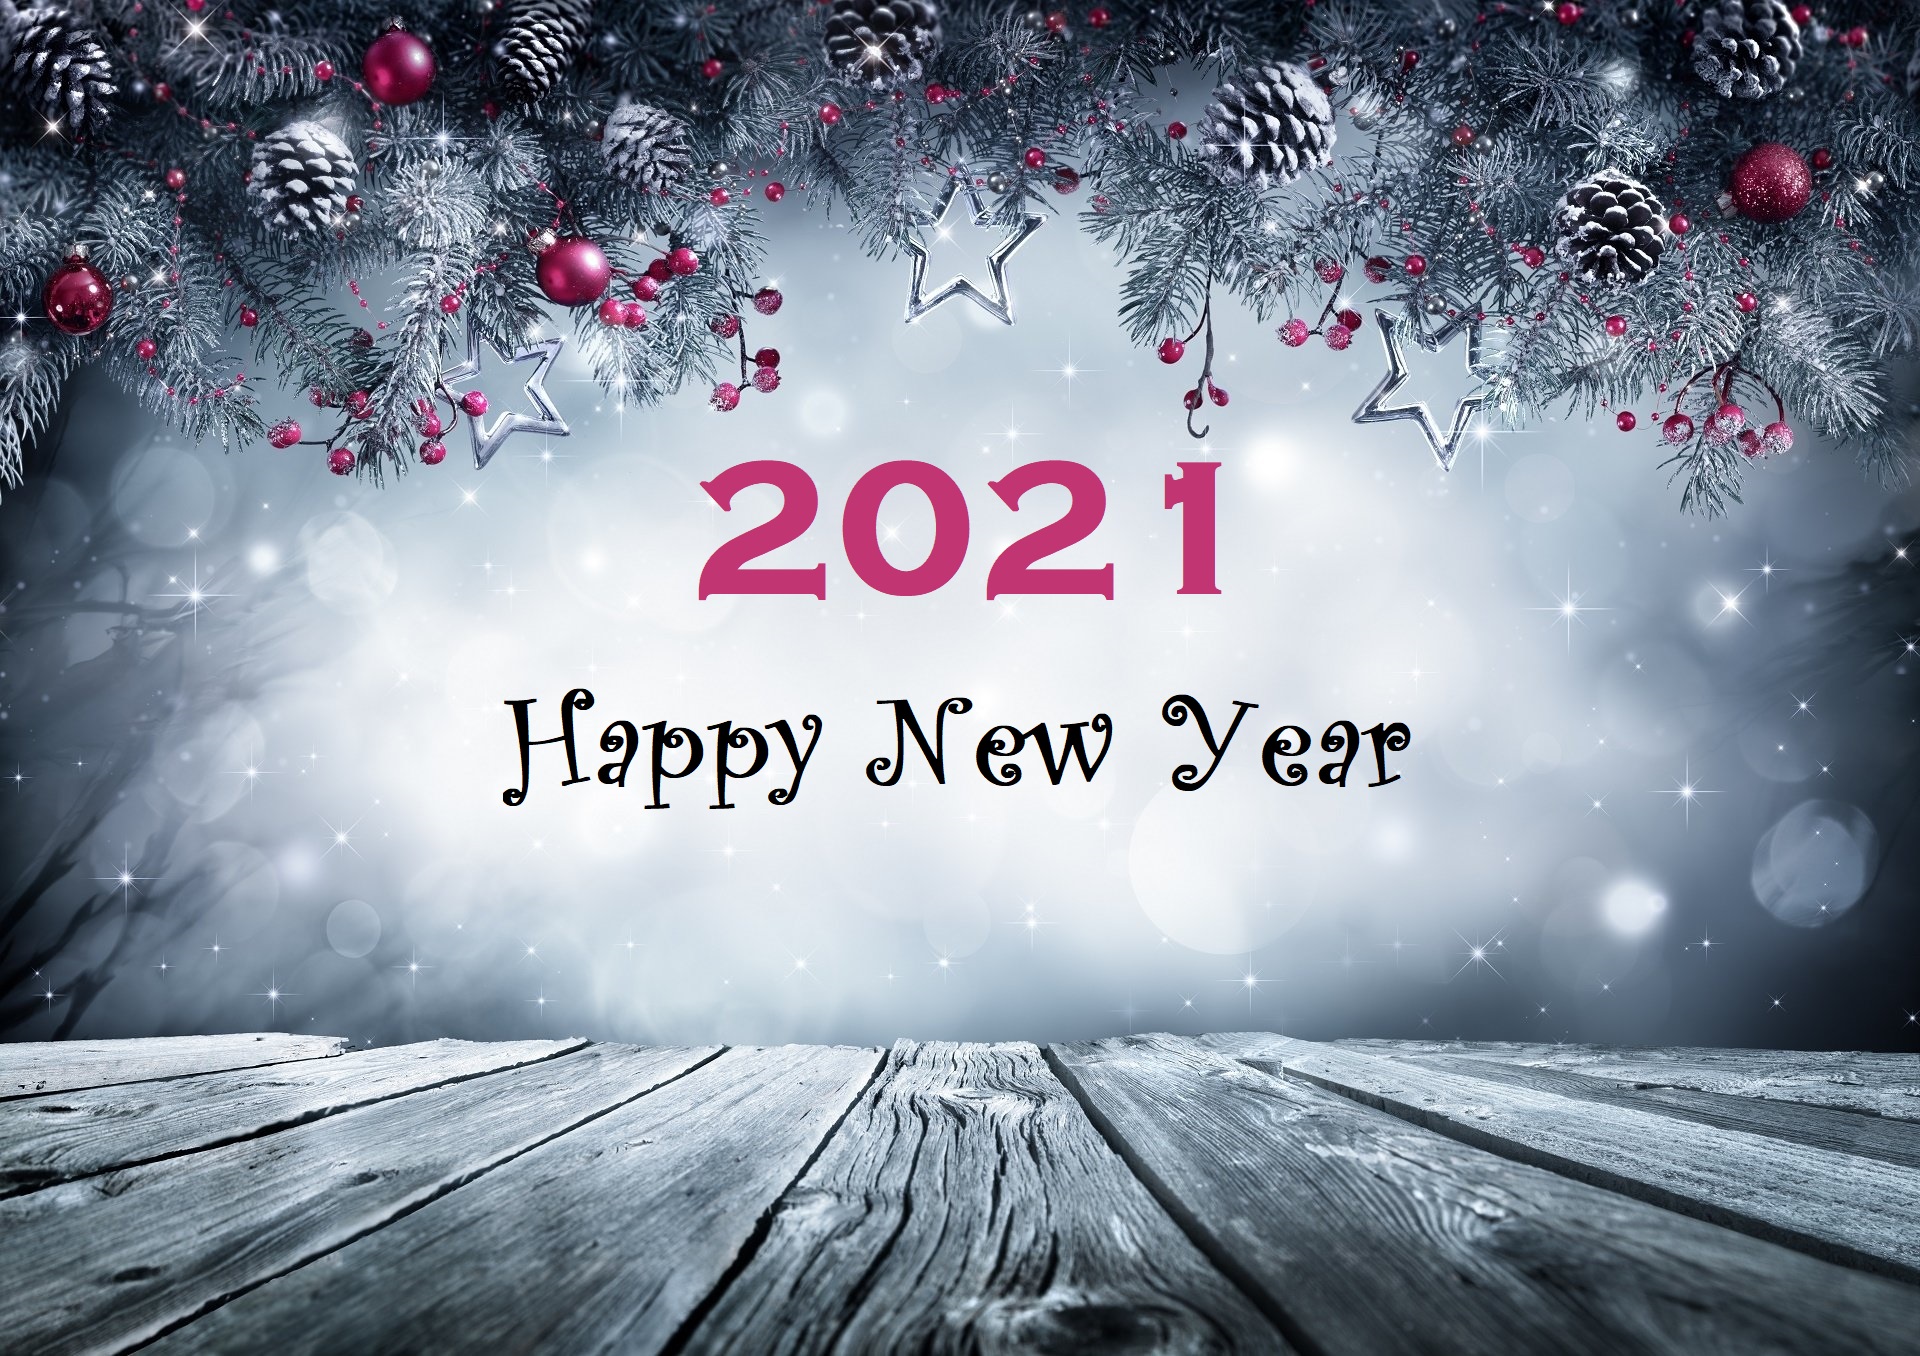 95 Best Happy New Year Wallpapers HD Images Free Download